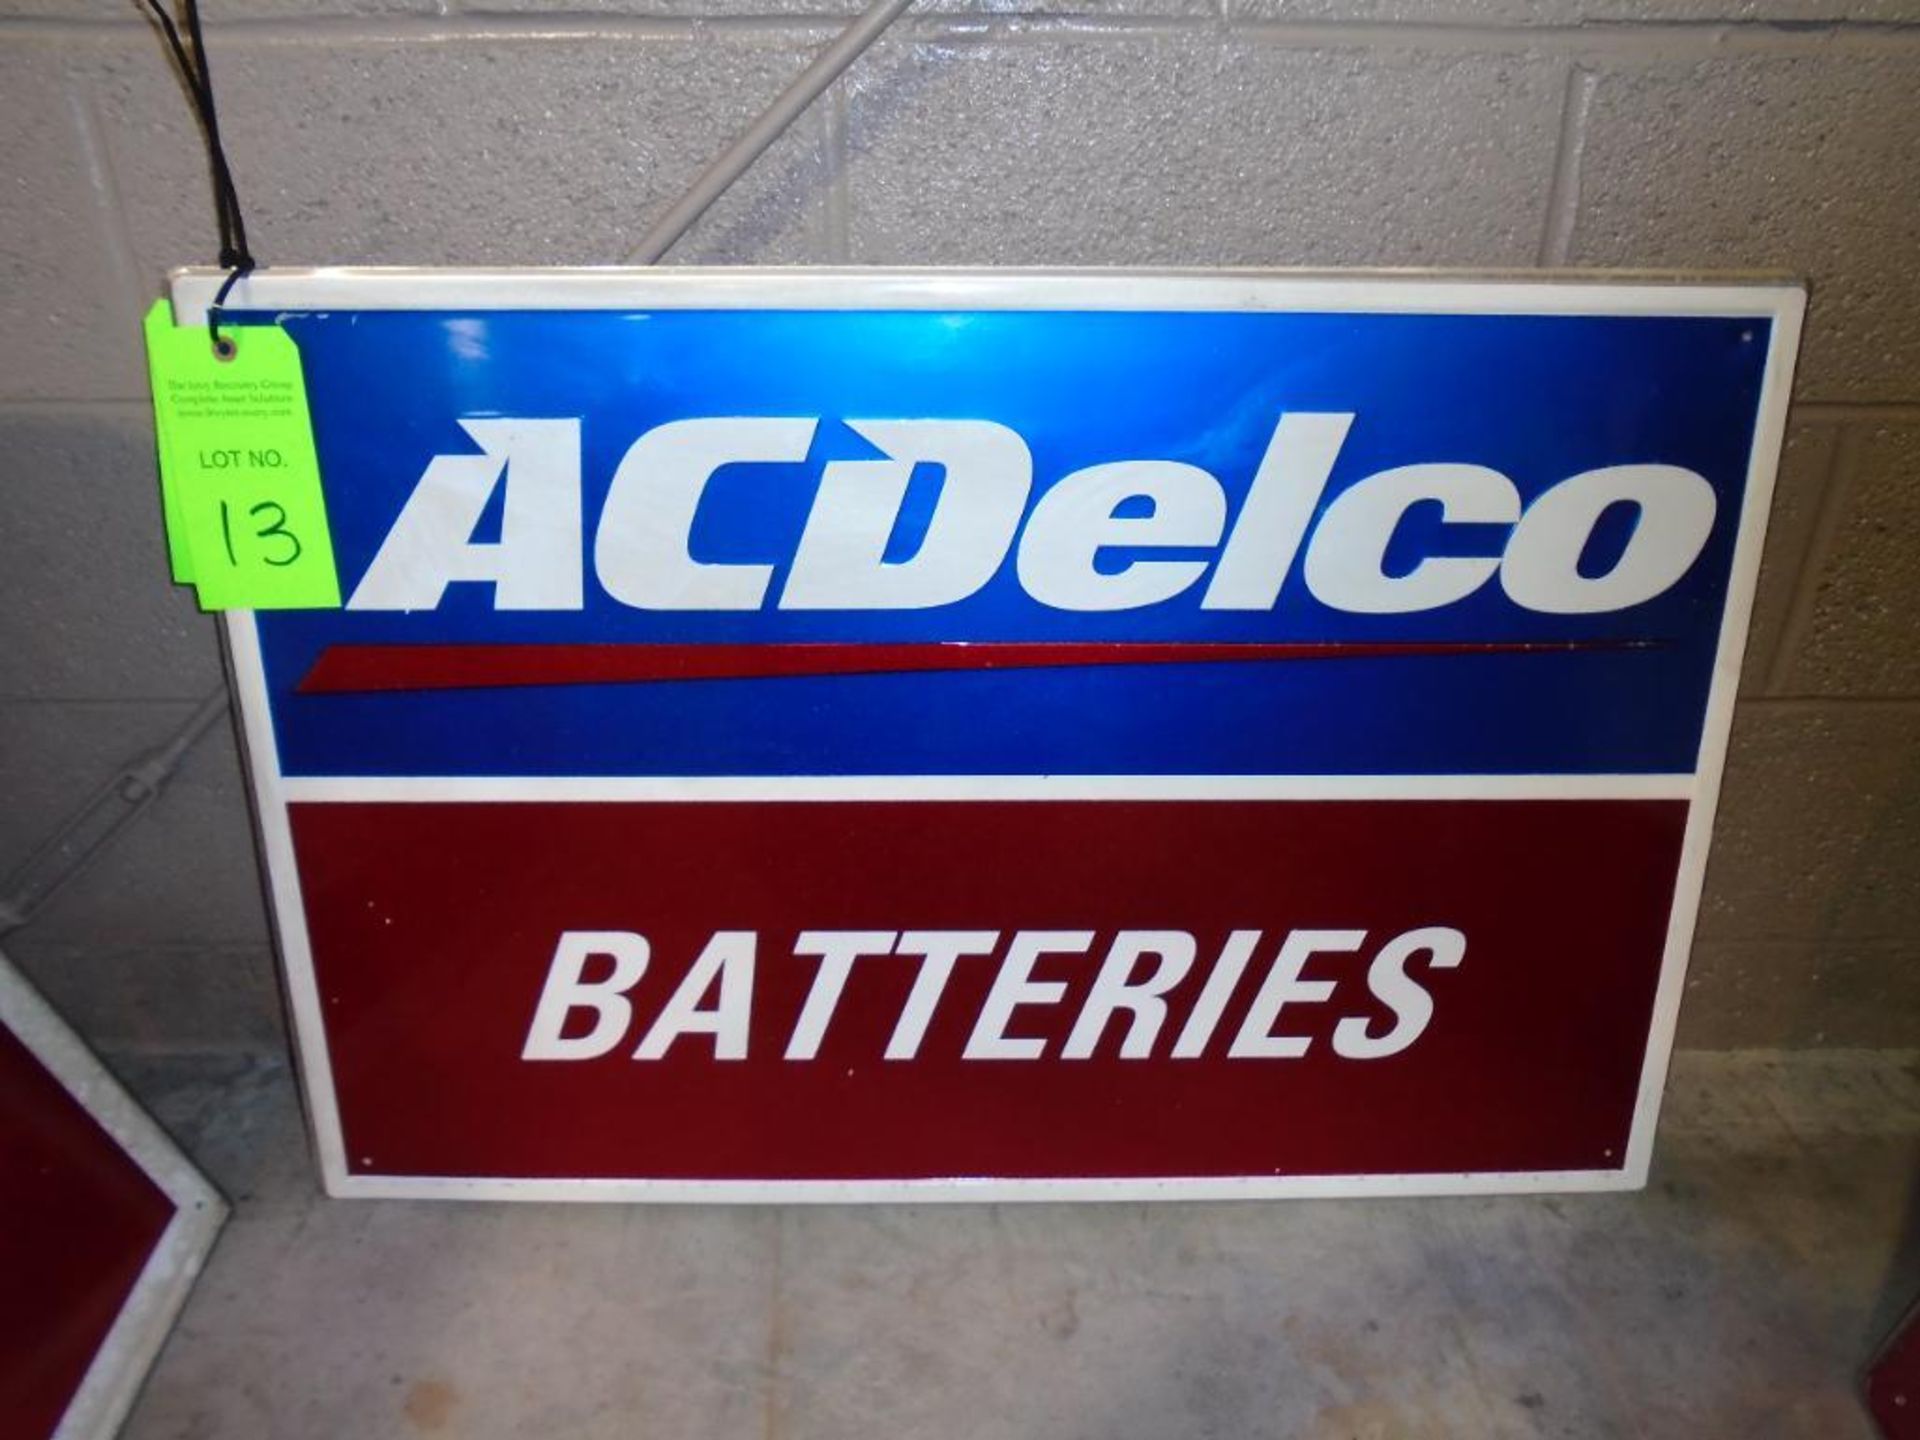 Ac Delco Batteries Sign - Image 2 of 2